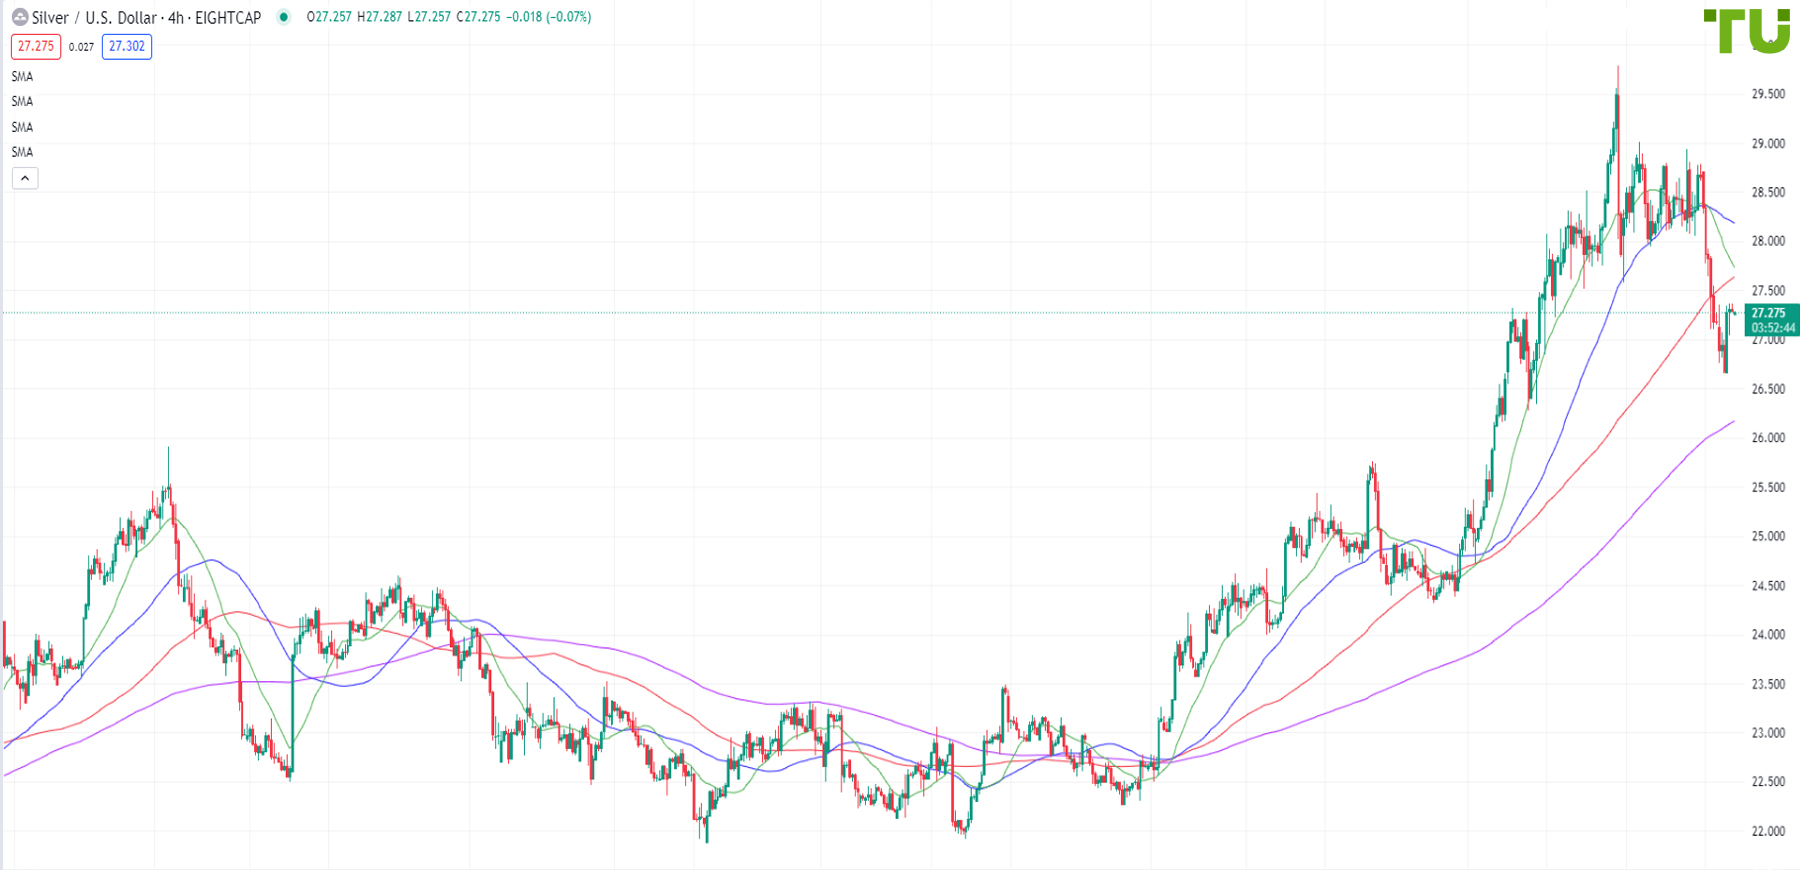 XAG/USD continues to be under pressure